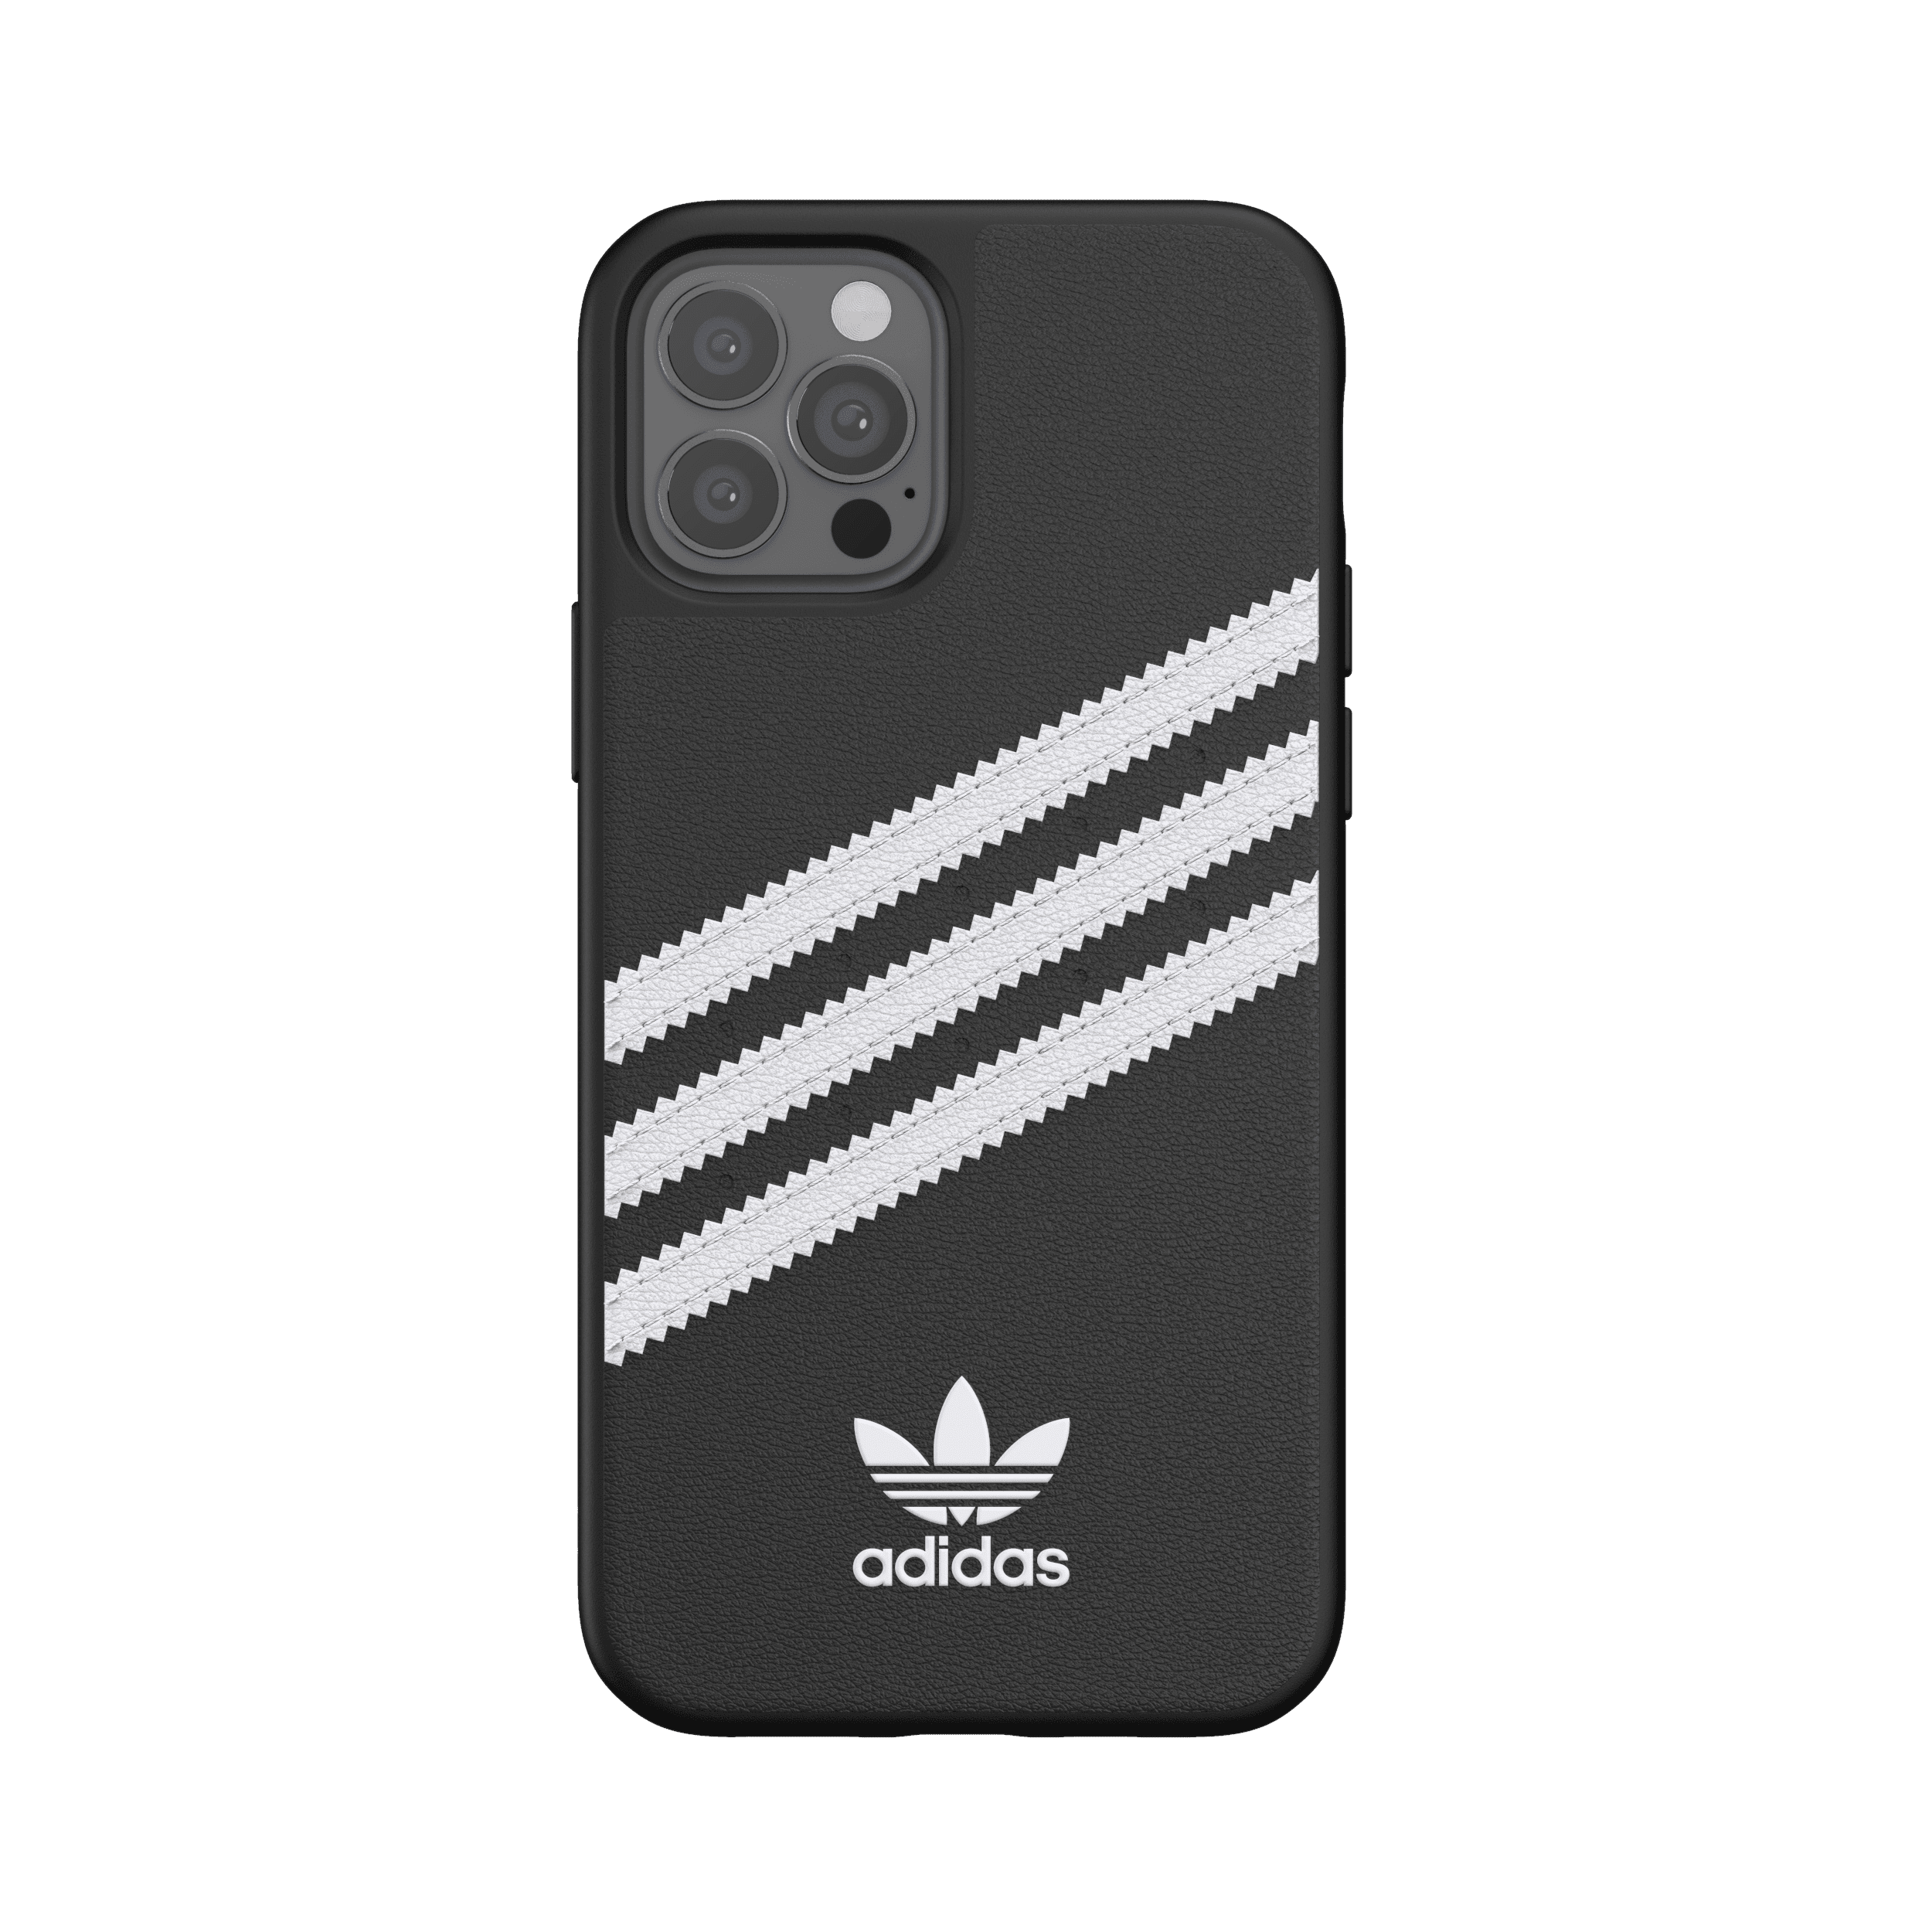 adidas samba apple iphone 12 12 pro moulded case back cover w 3 stripes trefoil design scratch drop protection w tpu bumper wireless charging compatible black white